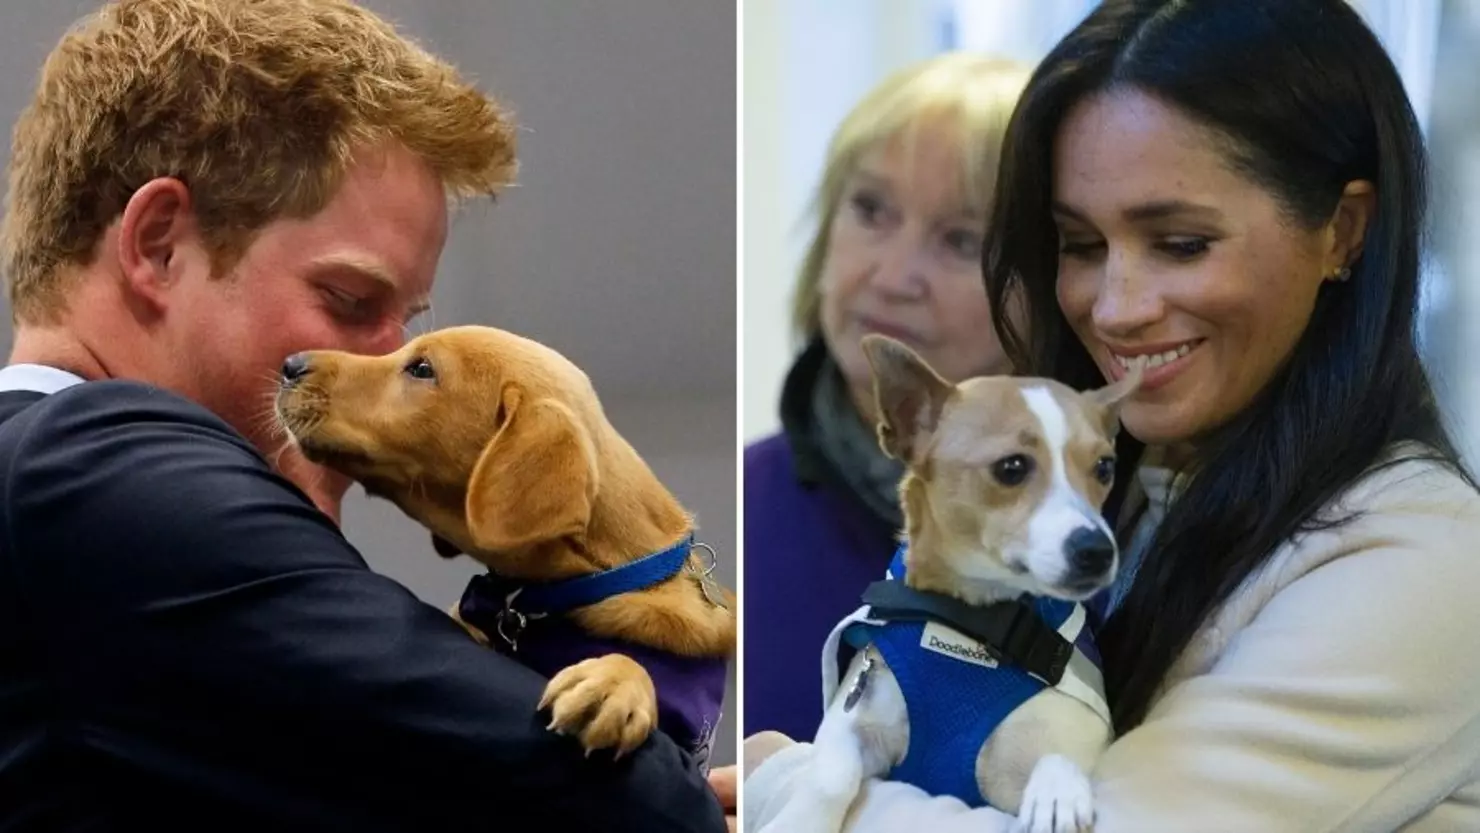 Prince Harry and Meghan Markle's adorable Beagle named Mamma Mia made a surprise appearance in a series of new photos.